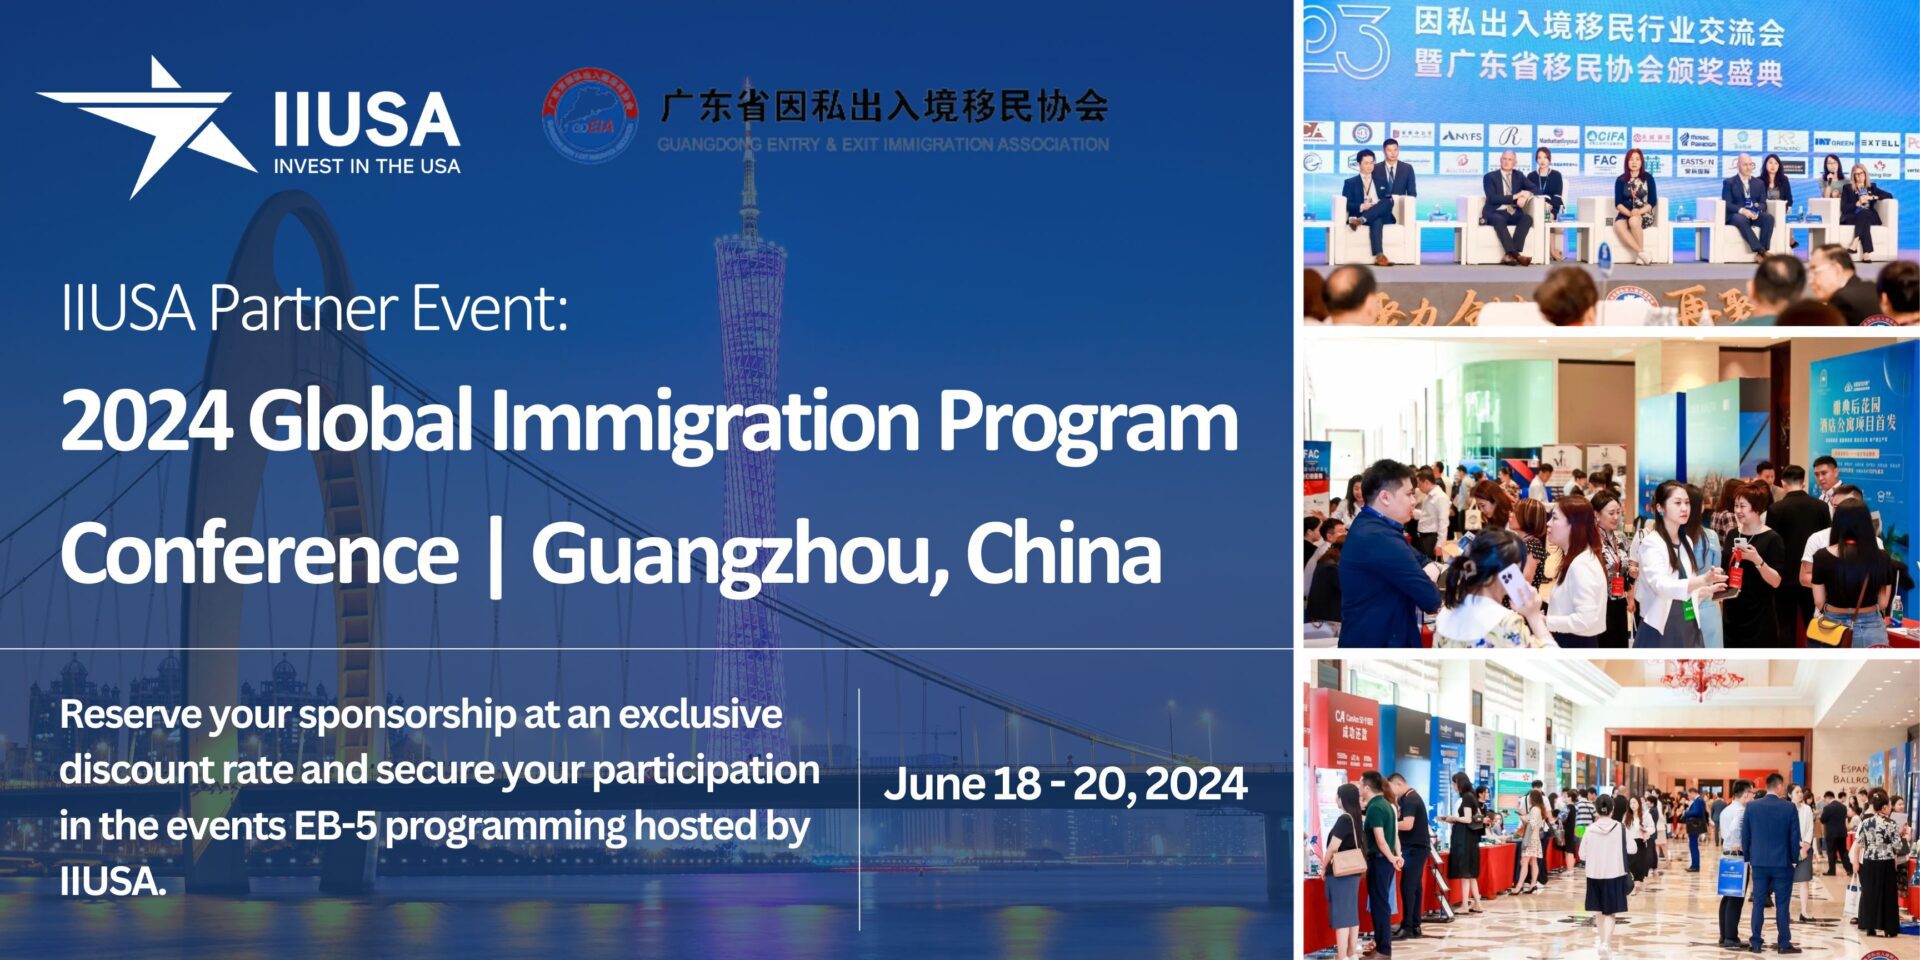 Join IIUSA at the 2024 Global Immigration Program Conference in Guangzhou, China!